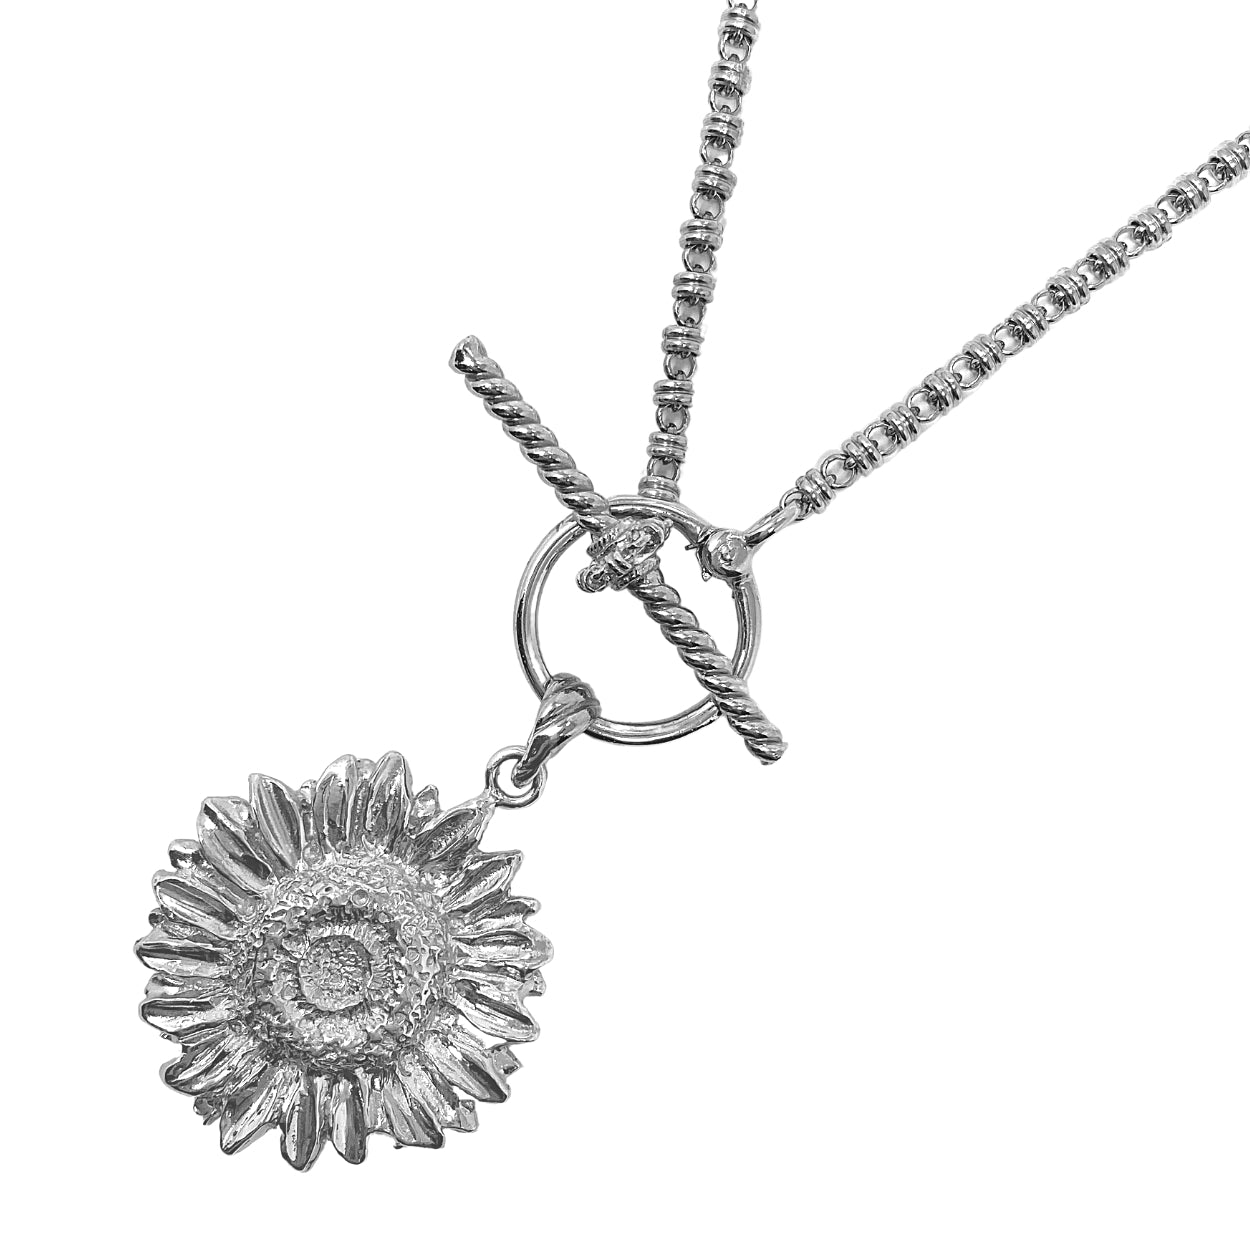 A closeup of the silver toggle clasp with an attached silver sunflower pendant on a silver necklace - the silver chain is from the Links 3mm collection from DelBrenna Italian Jewelry designers and artisans. Hand-crafted in Tuscany.